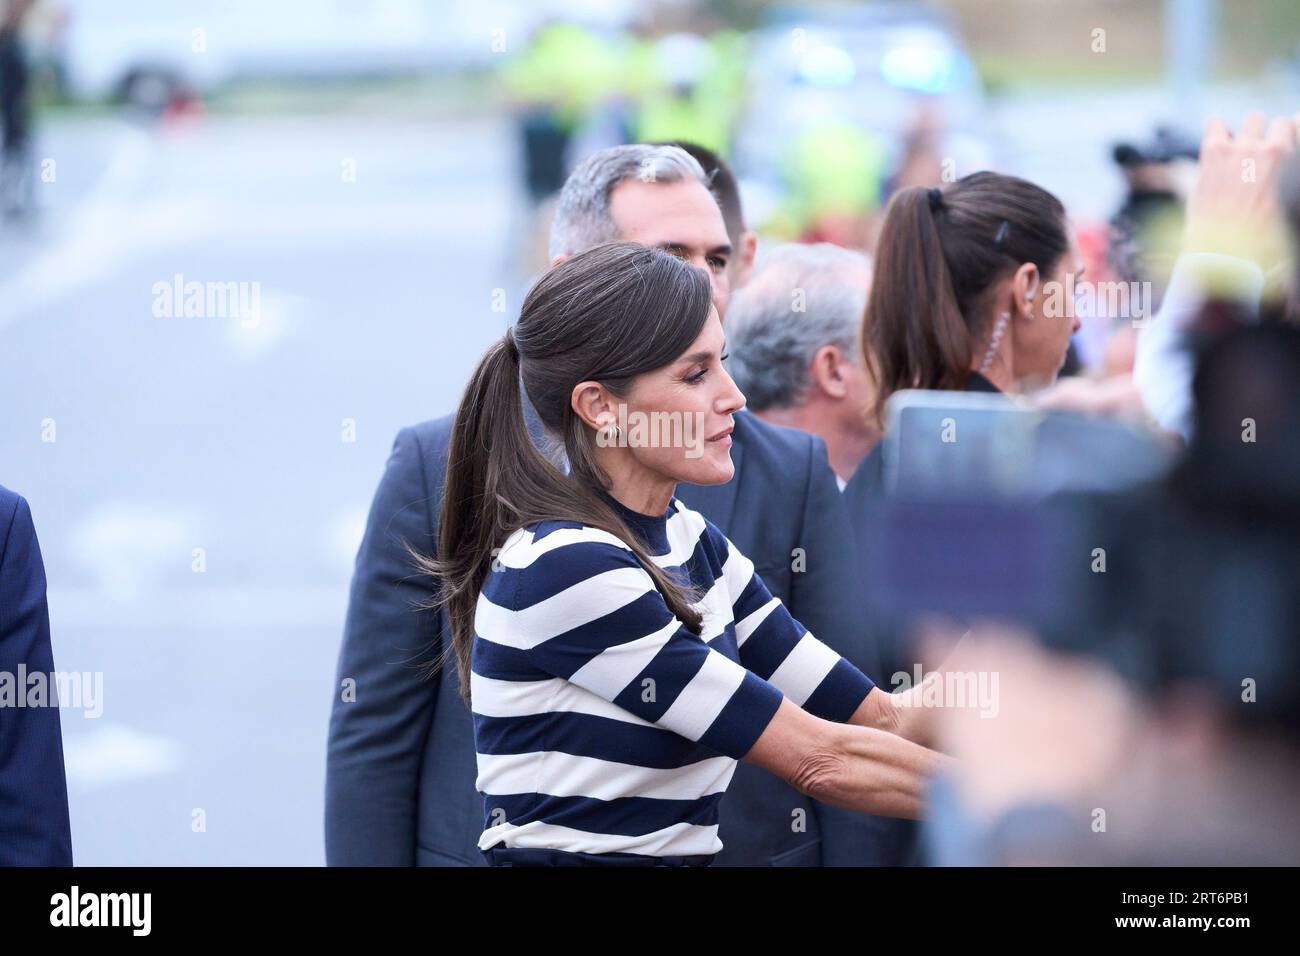 Sigueiro/Orosos, Spain. September 11, 2023, Sigueiro/Orosos, Galicia,  Spain: Queen Letizia of Spain attends the Opening of the School Year  2023/2024 at CEIP do Camino Ingles on September 11, 2023 in  Sigueiro/Orosos, Spain (